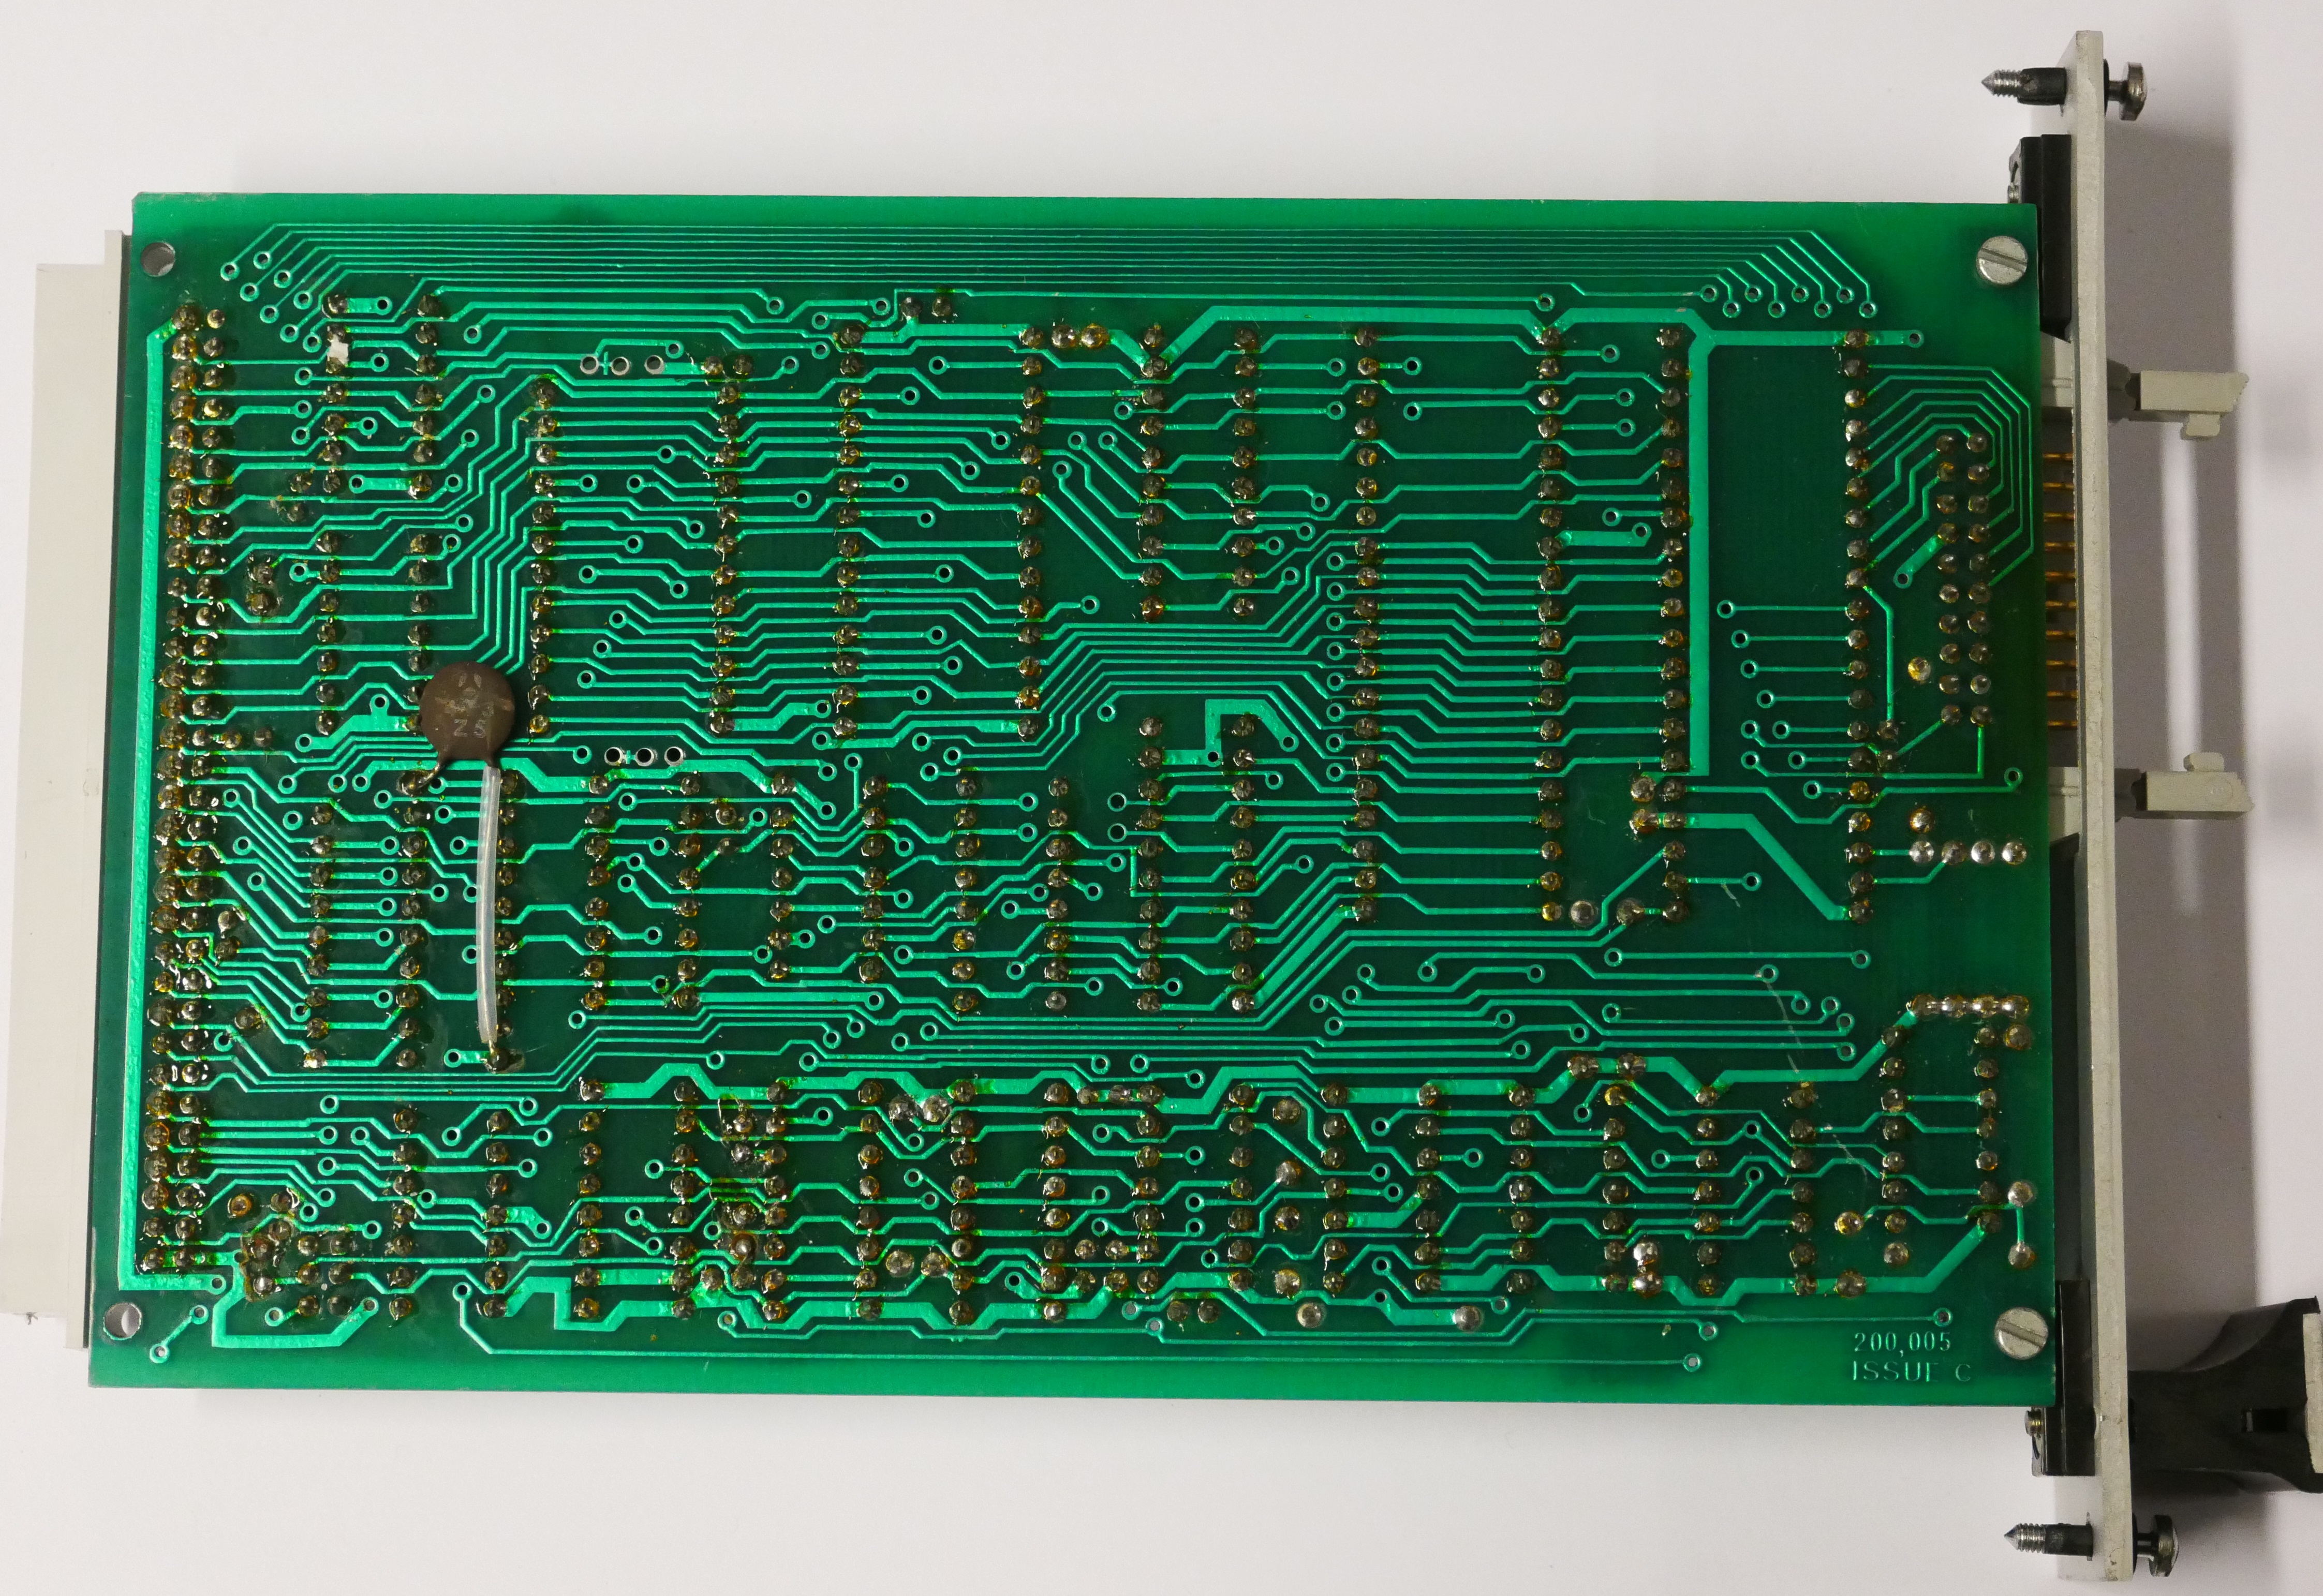 Acorn System 6502A Microcomputer PCB Issue C